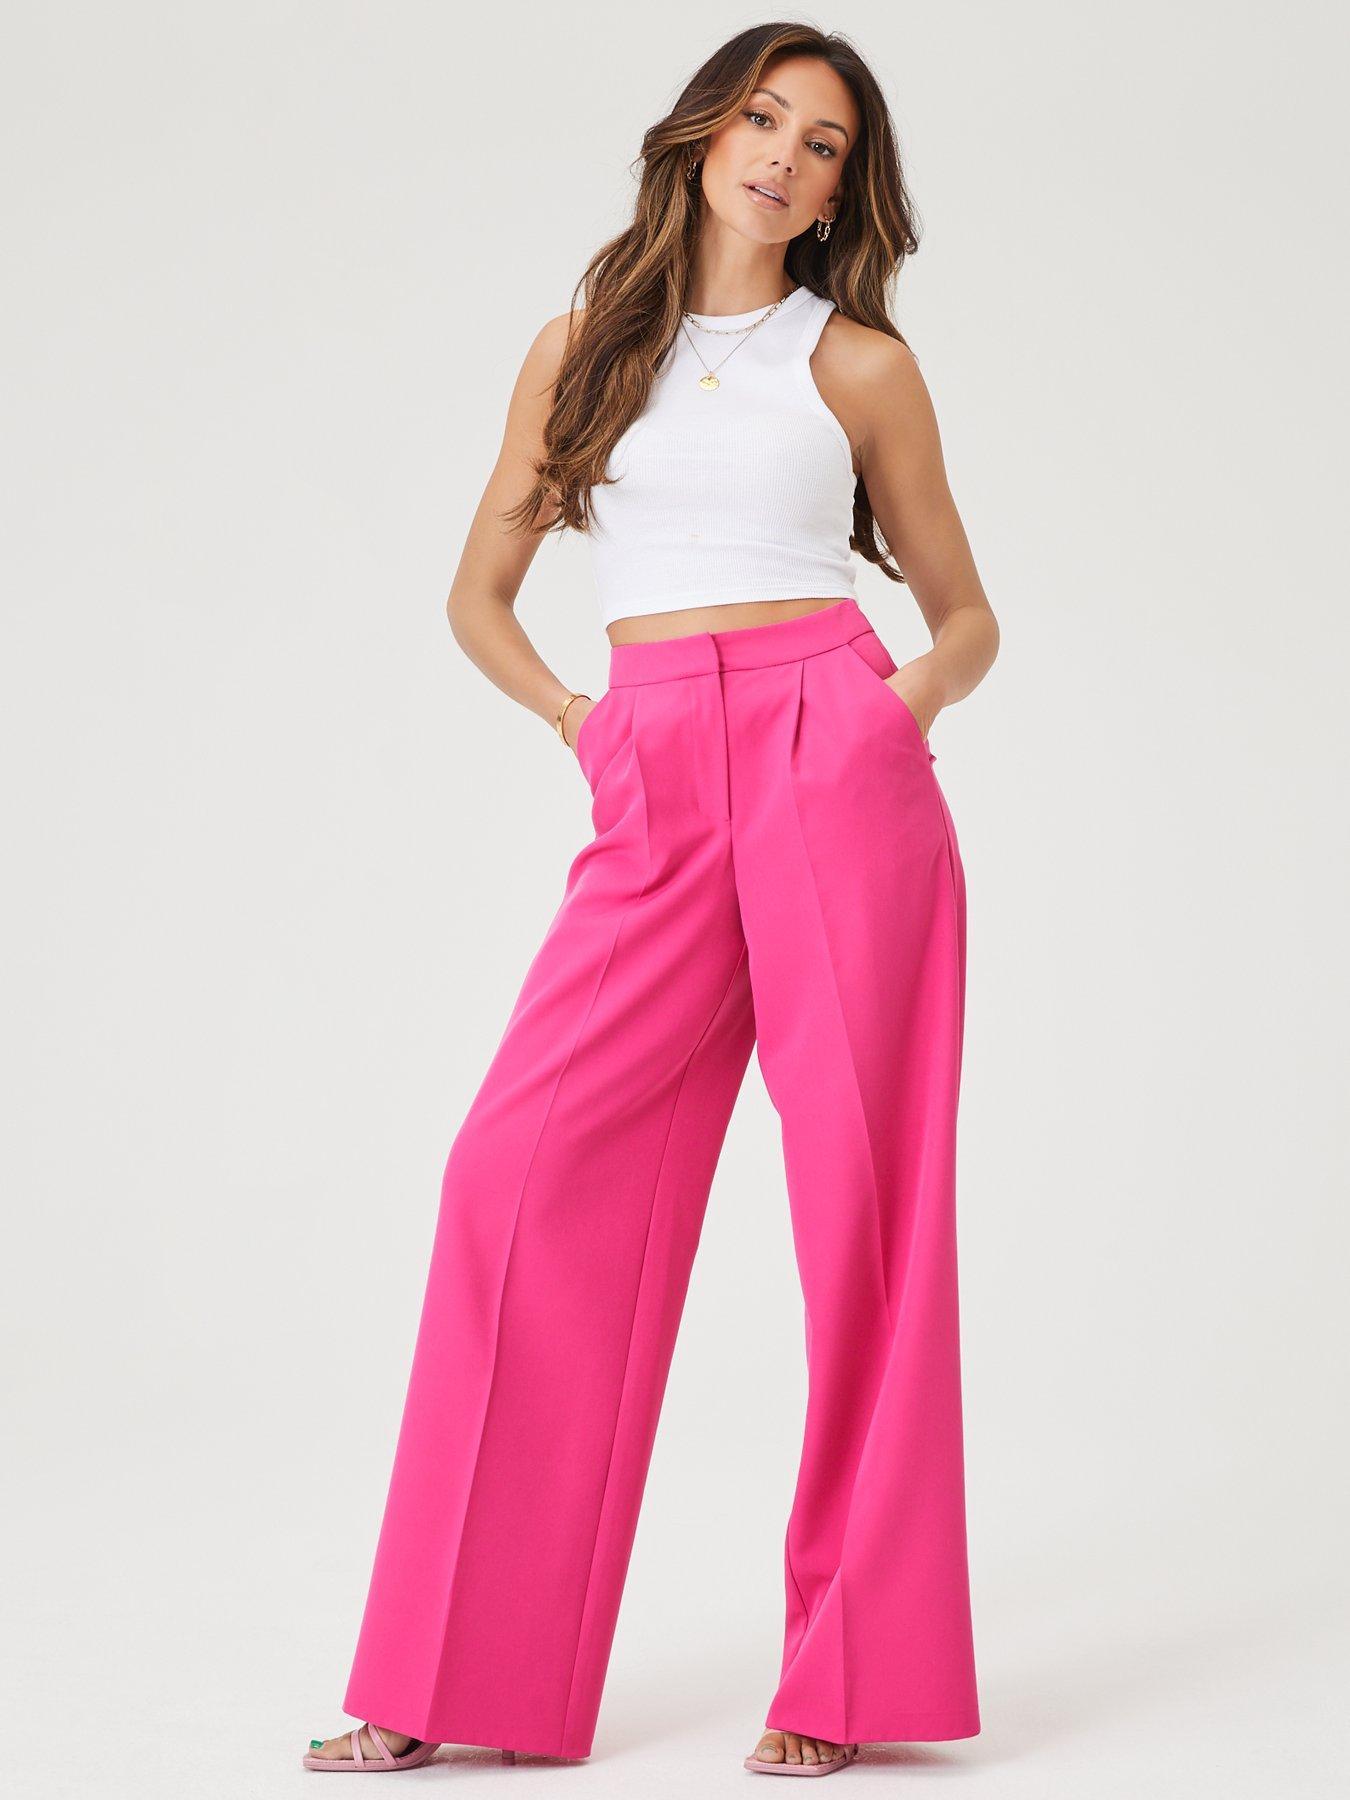 Ex Wall*s 8-18 Lilac Pink Palazzo Wide Leg Tie Waist Trousers Smart Work Formal 